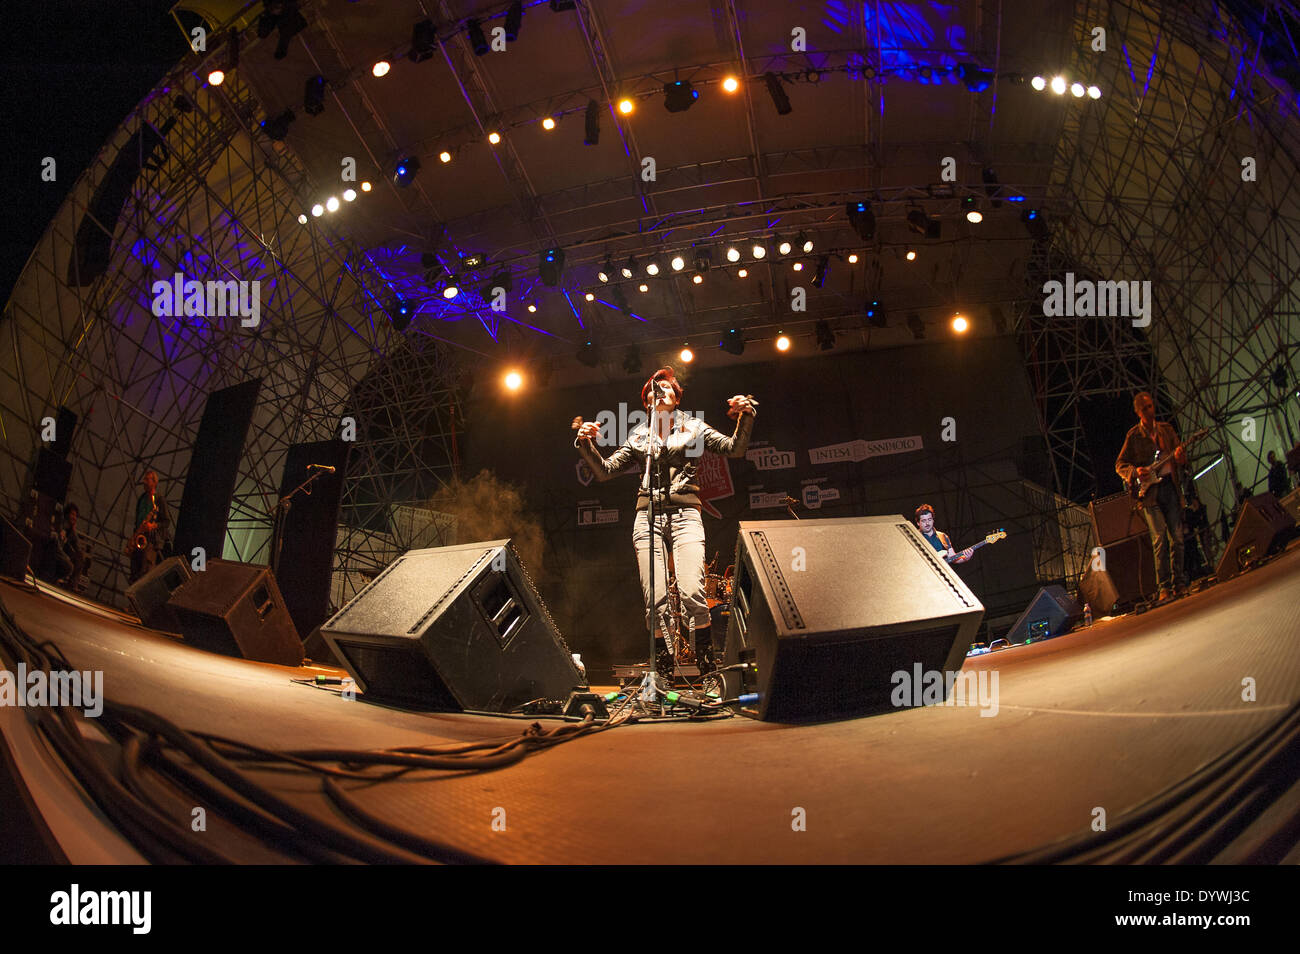 Turin, Italy. 25th Apr, 2014. ' Torino Jazz Festival 2014 - Start of the Festival 25 th April 2014 - Performance of Daniele Sepe und Rote Jazz Fraction Credit:  Realy Easy Star/Alamy Live News Stock Photo